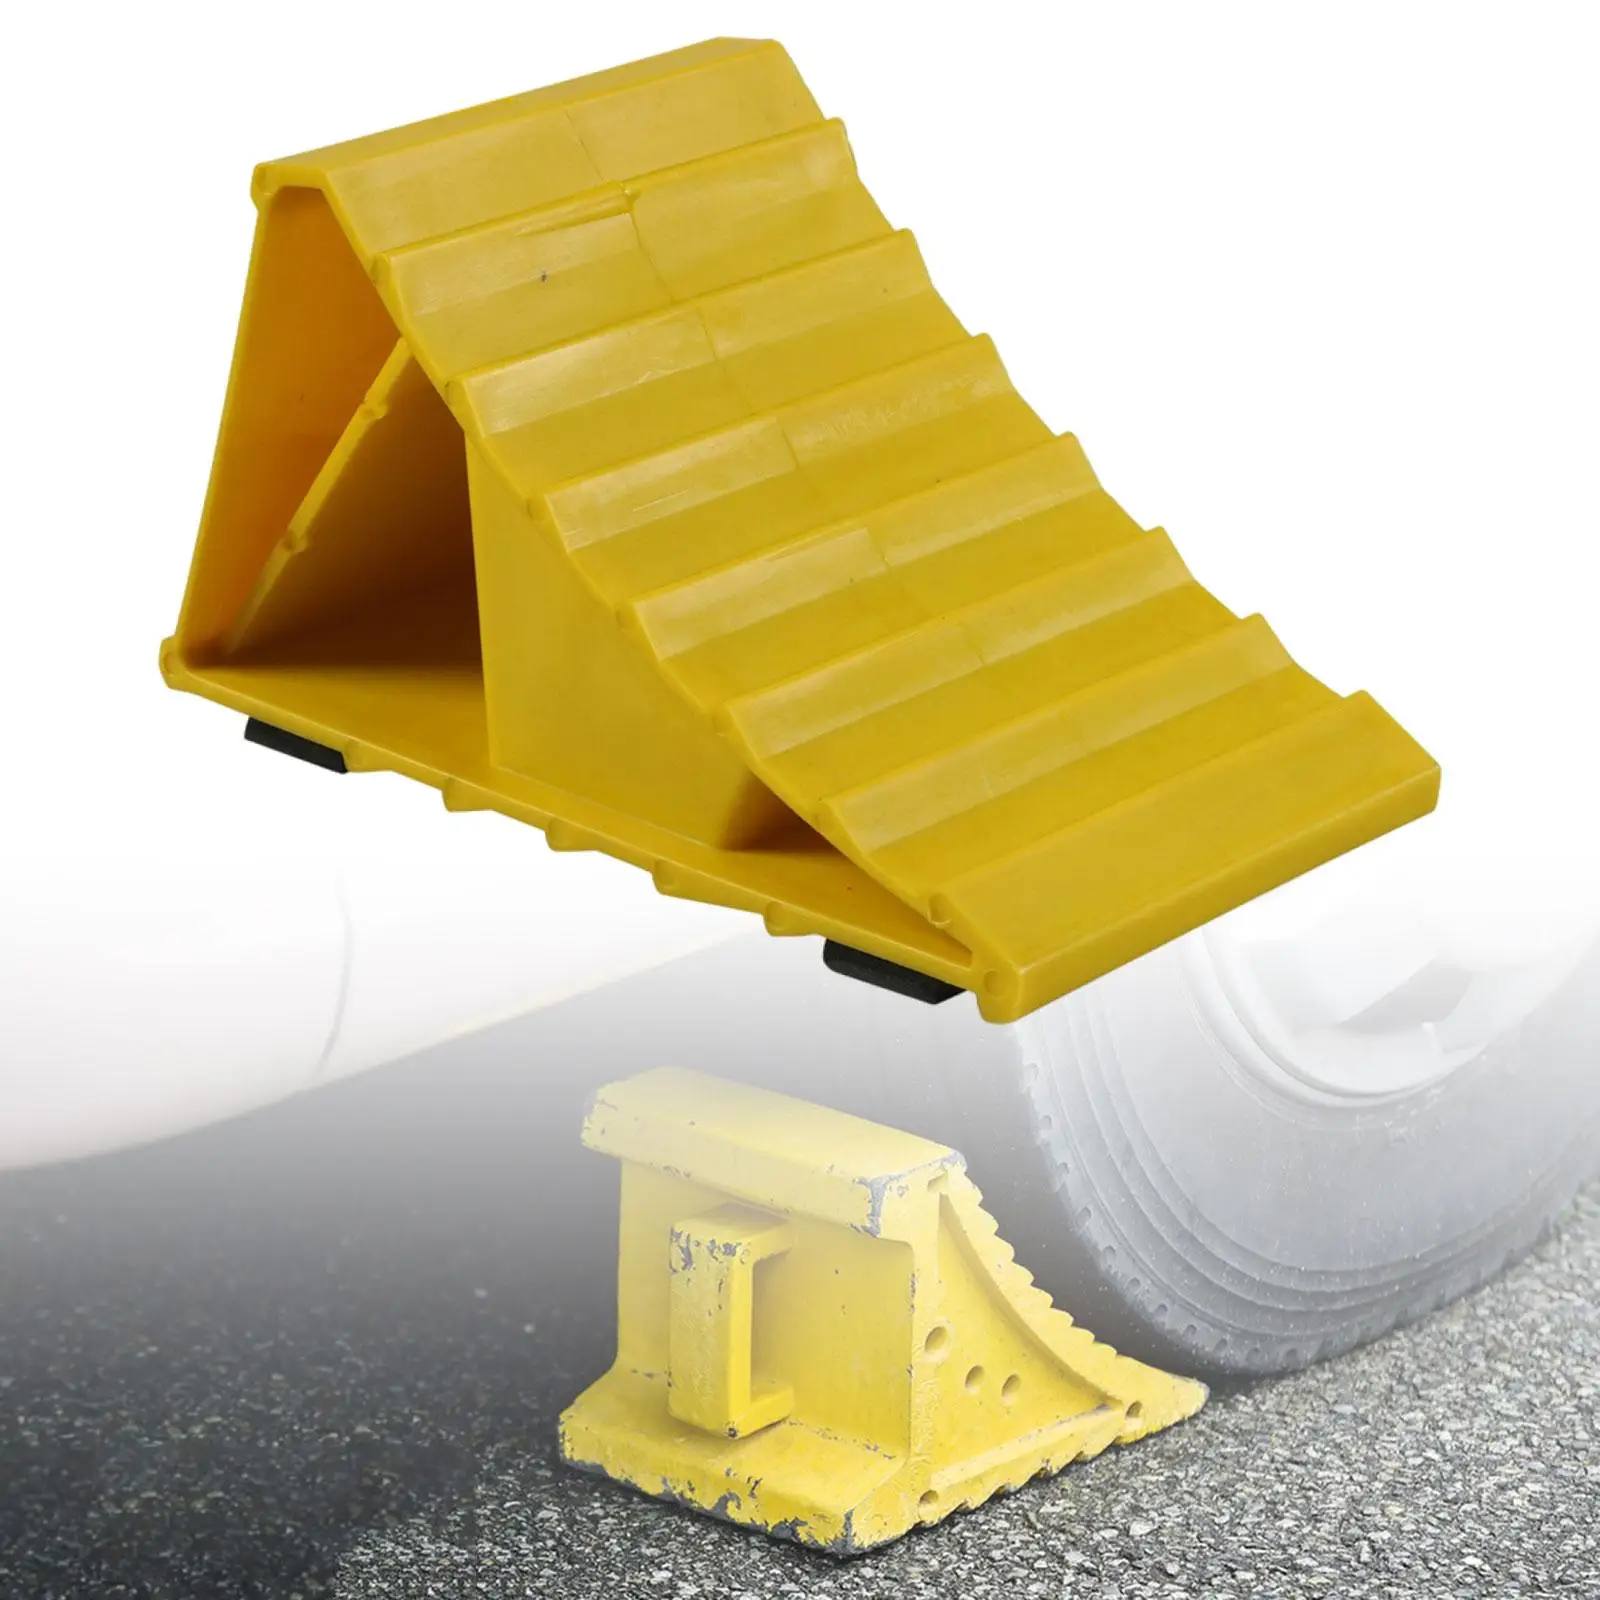 Travel Trailer RV Car Wheel Chock Multifunctional Triangle Base Durable Accessories Scratch Resistant Yellow Parking Chock